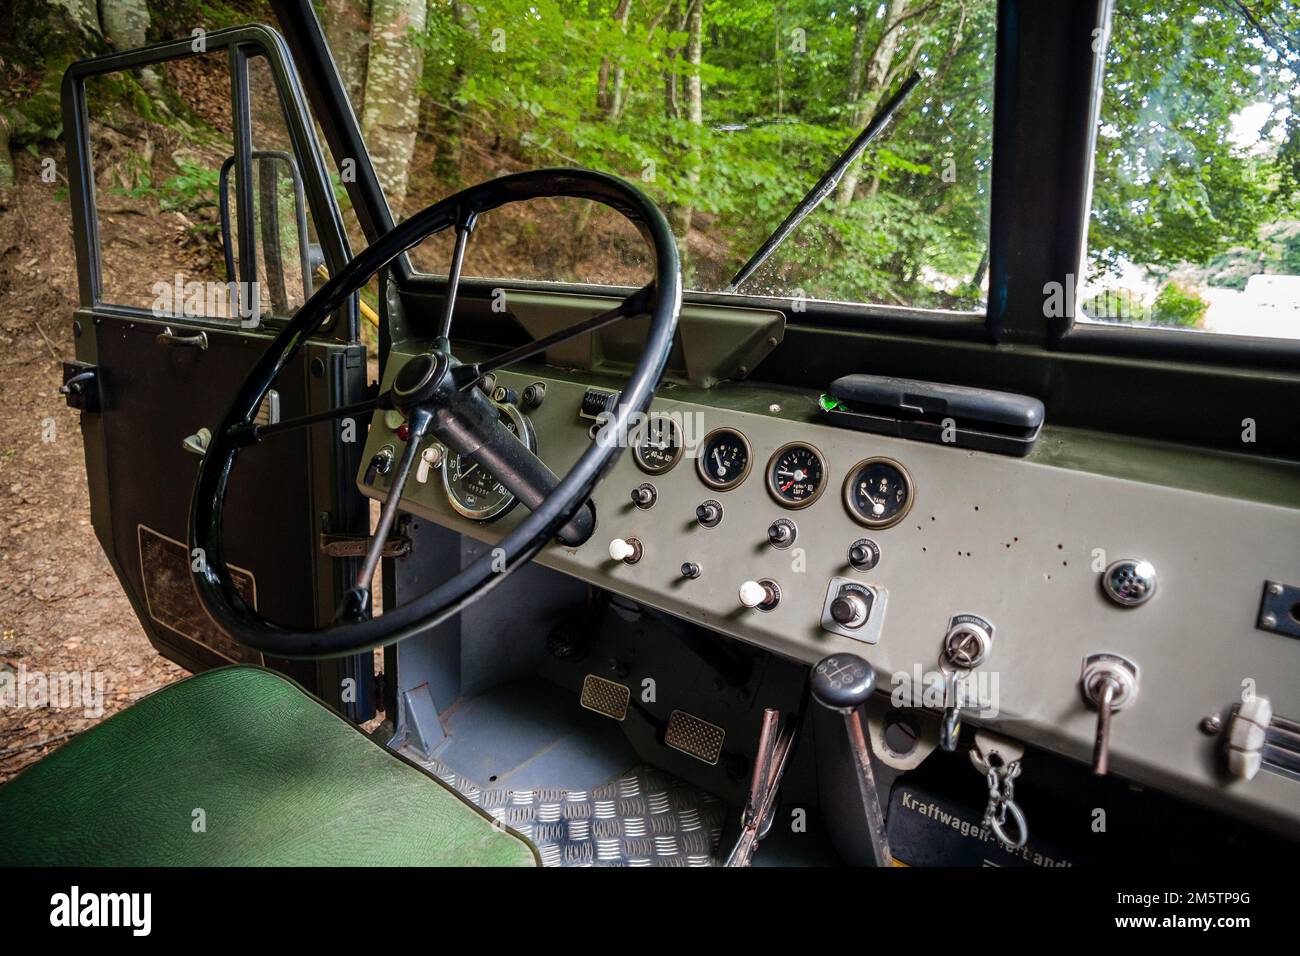 Closeup photo of a vintage Hanomag truck dashboard. Stock Photo